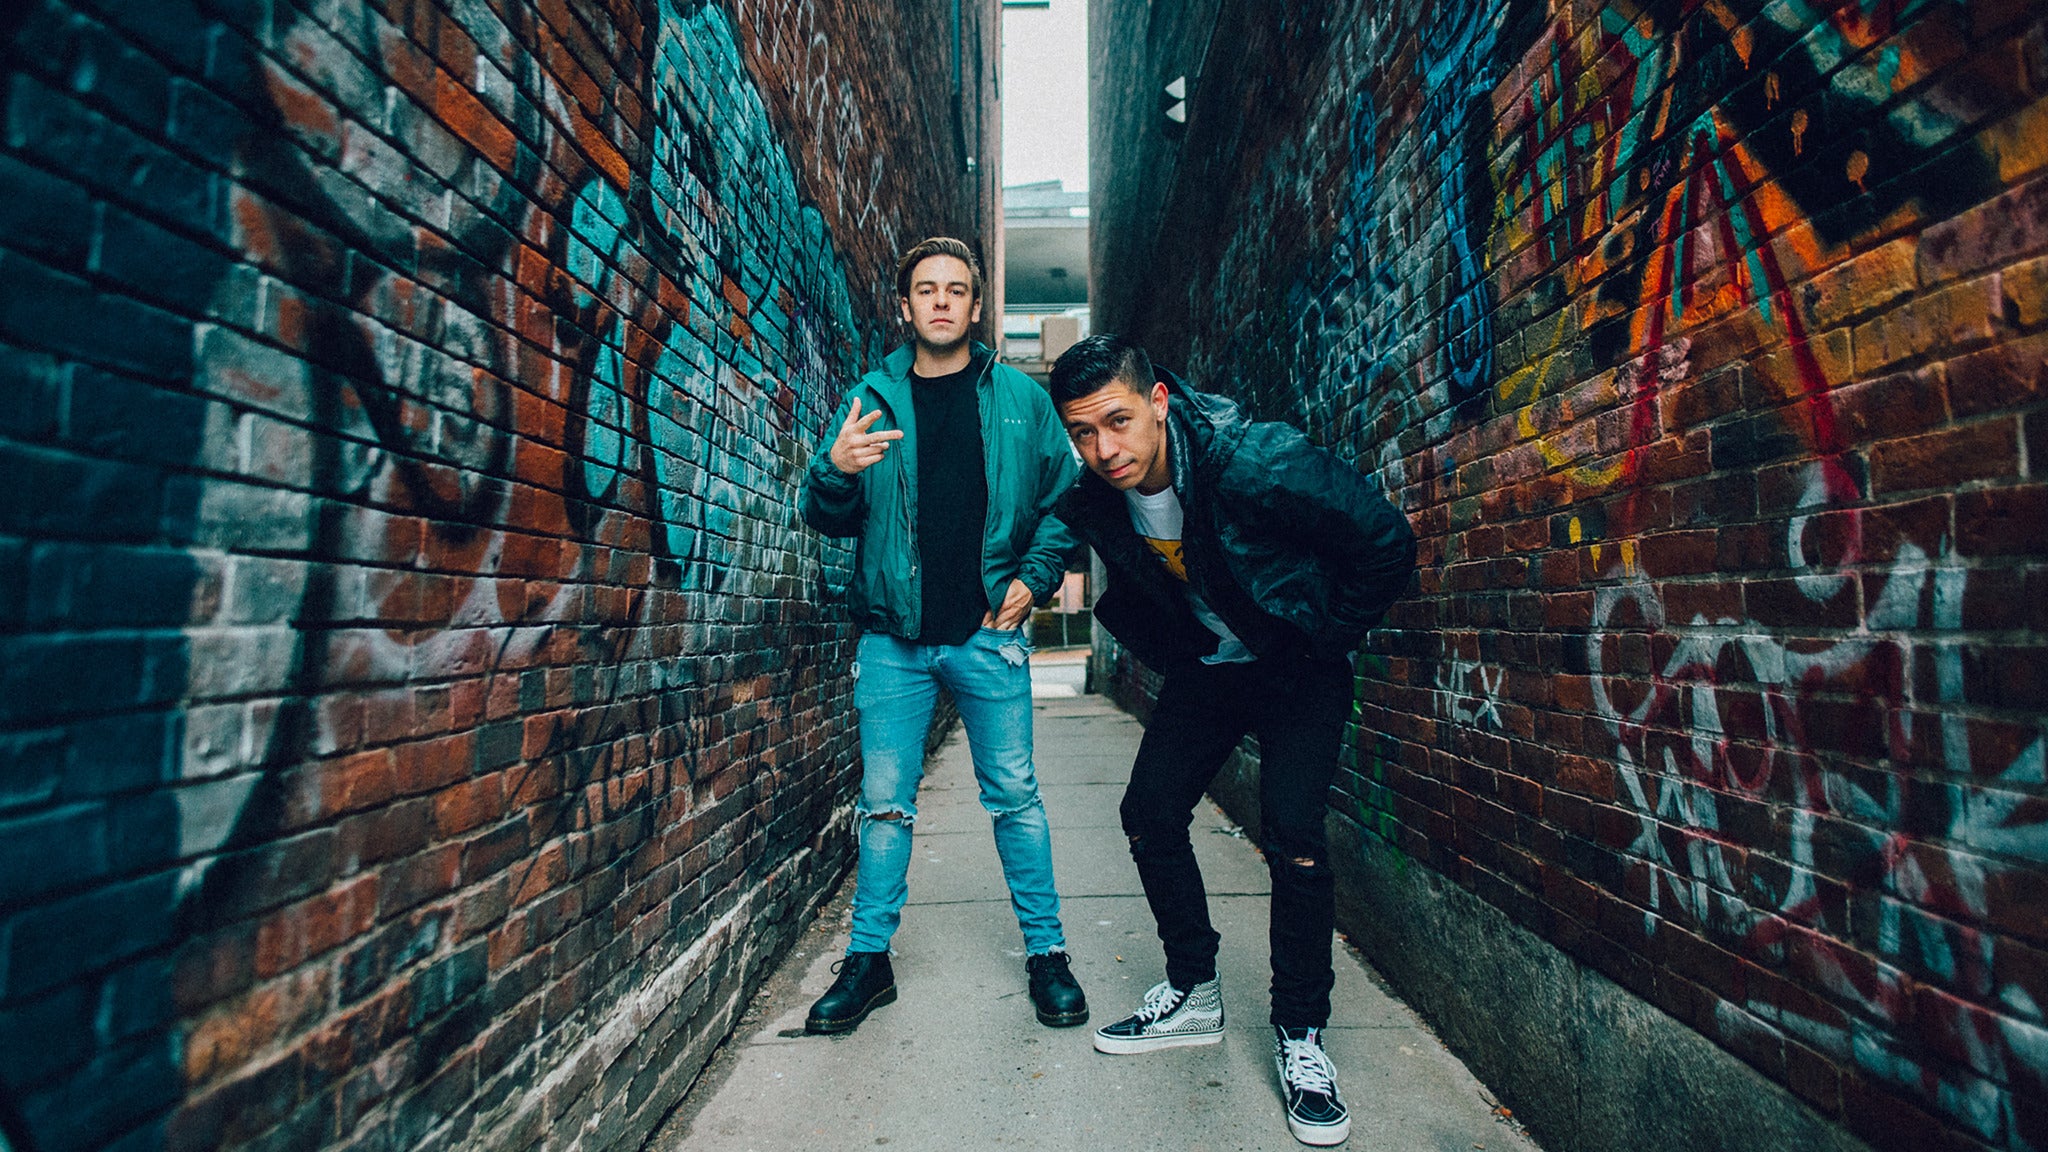 Cody Ko & Noel Miller: Tiny Meat Gang - Global Domination in Chicago promo photo for Local presale offer code